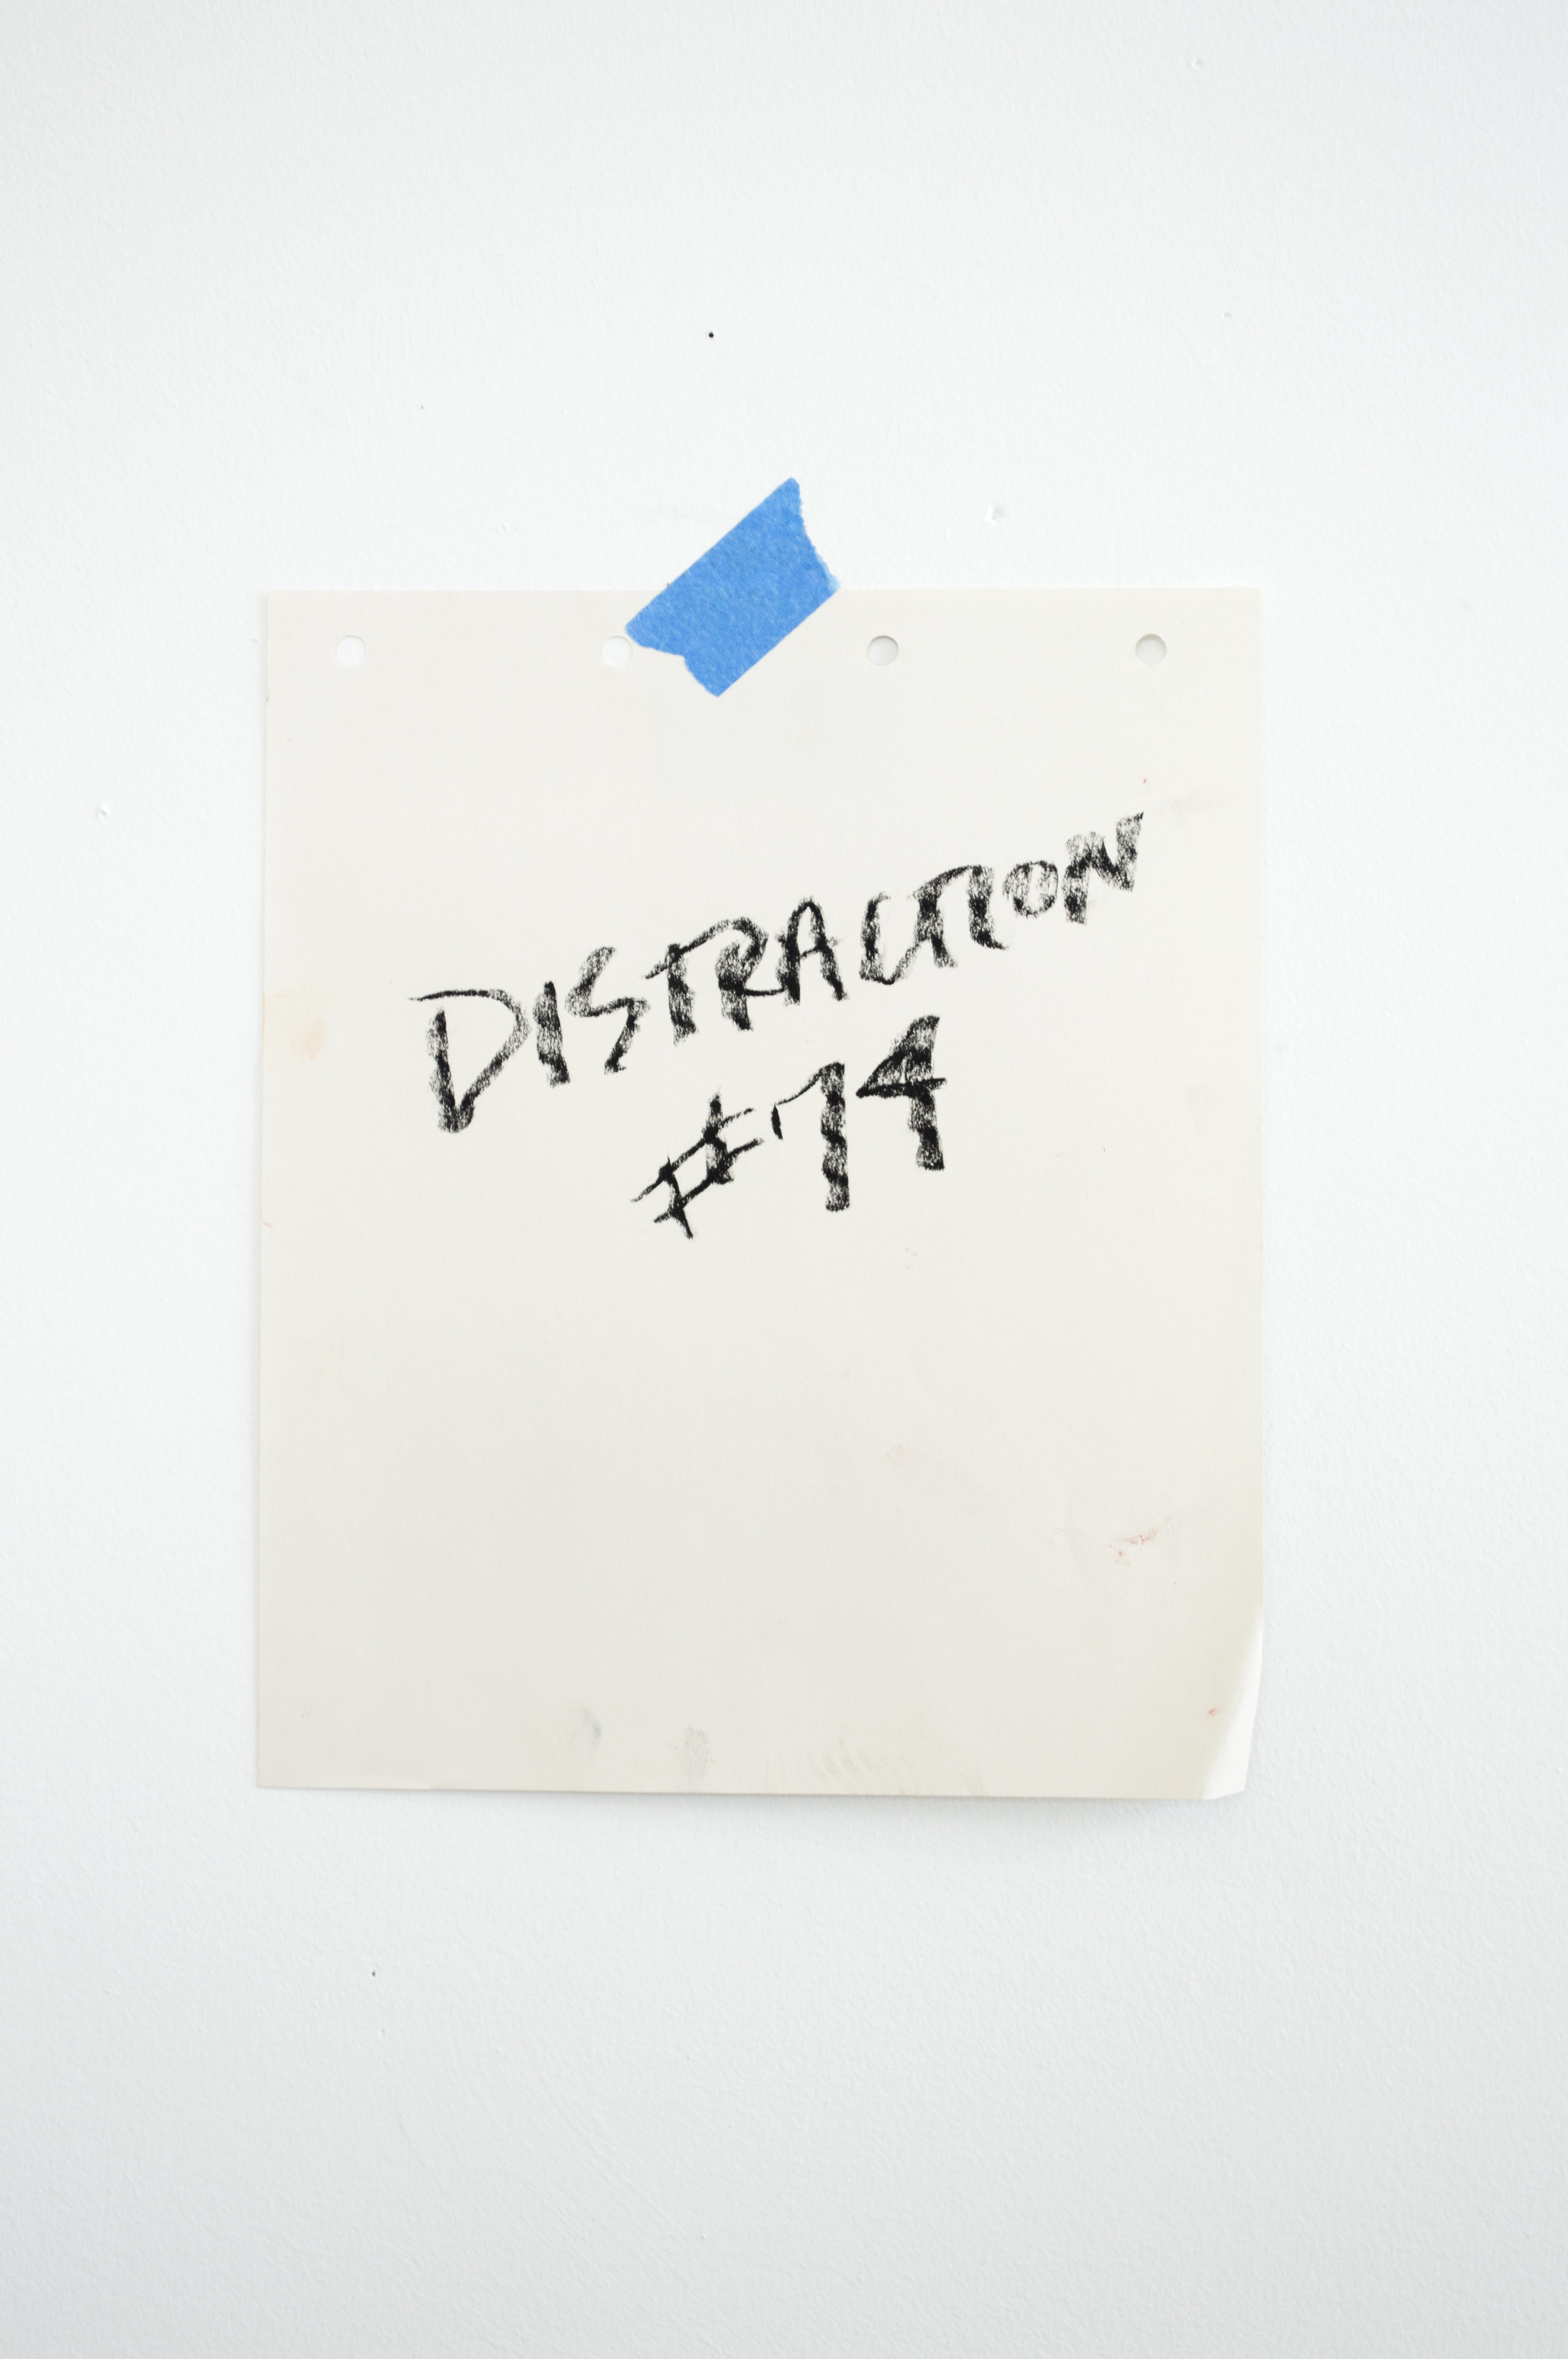 Distraction #74/Playlist Series  2015  Pastel and painter’s tape